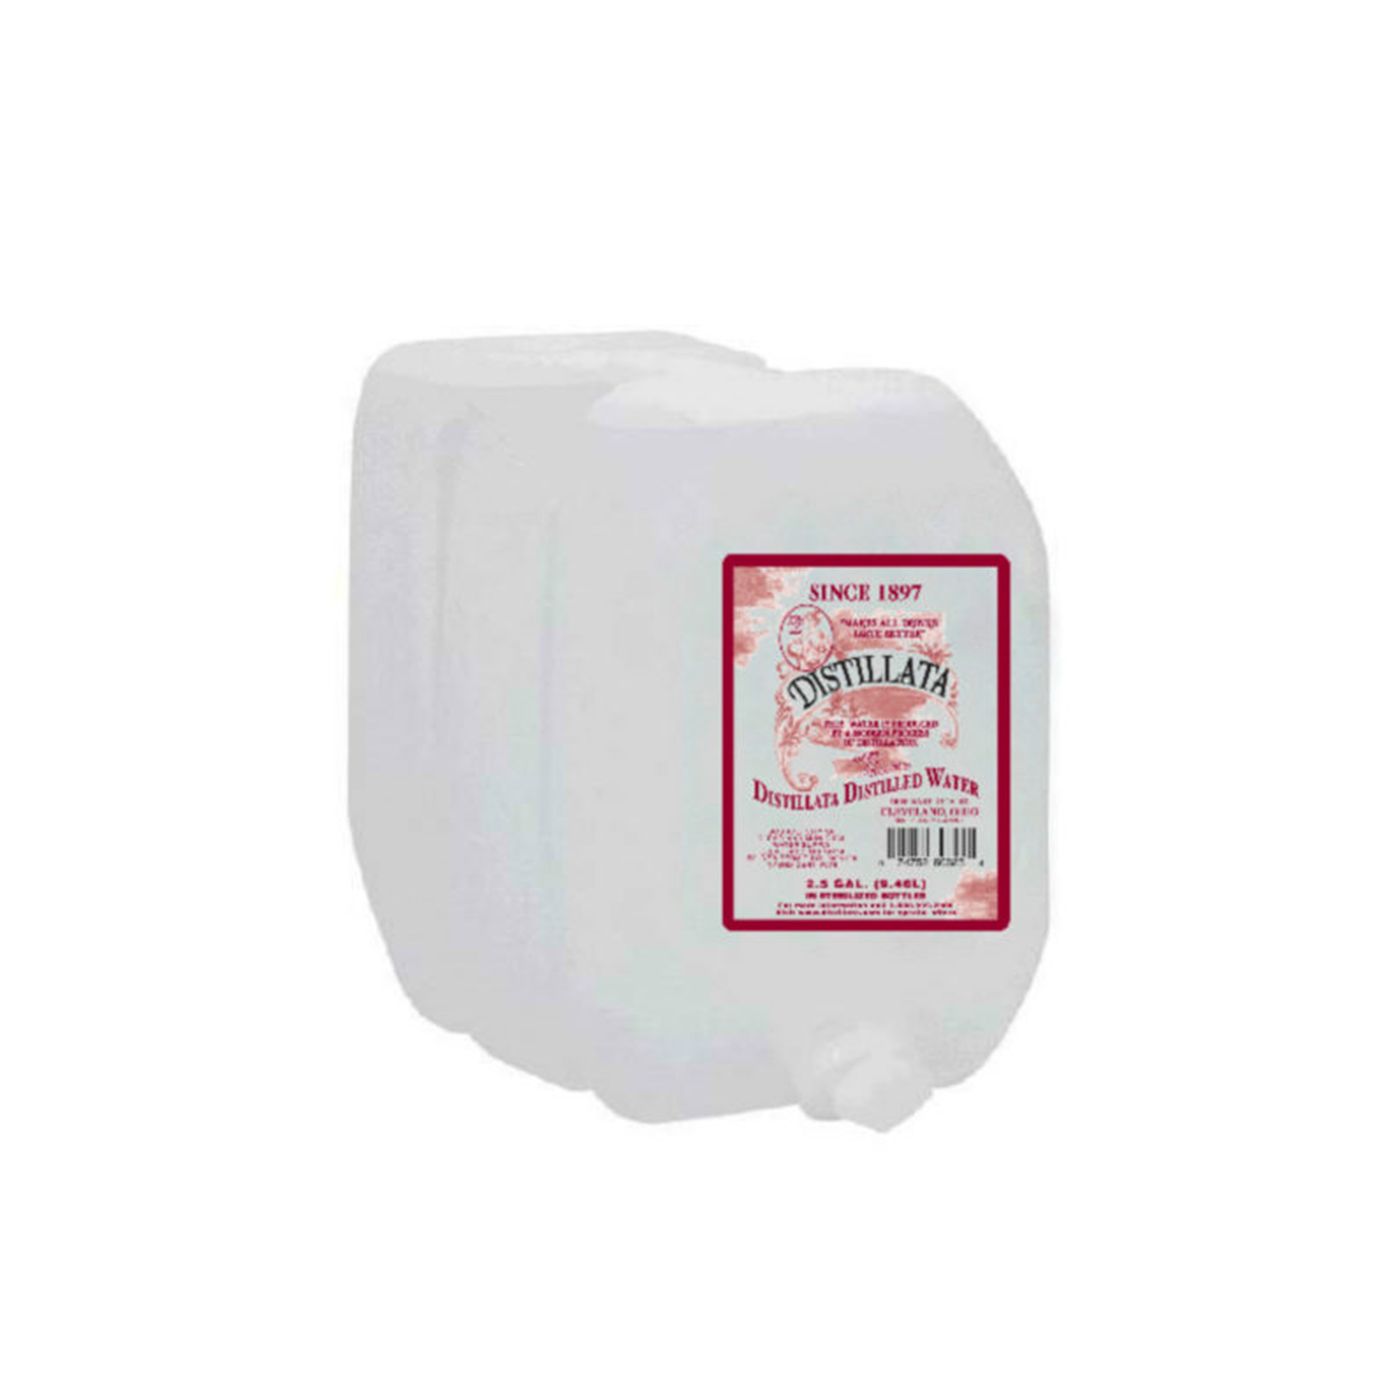 Save on Amelia Pure Steam Distilled Water Order Online Delivery